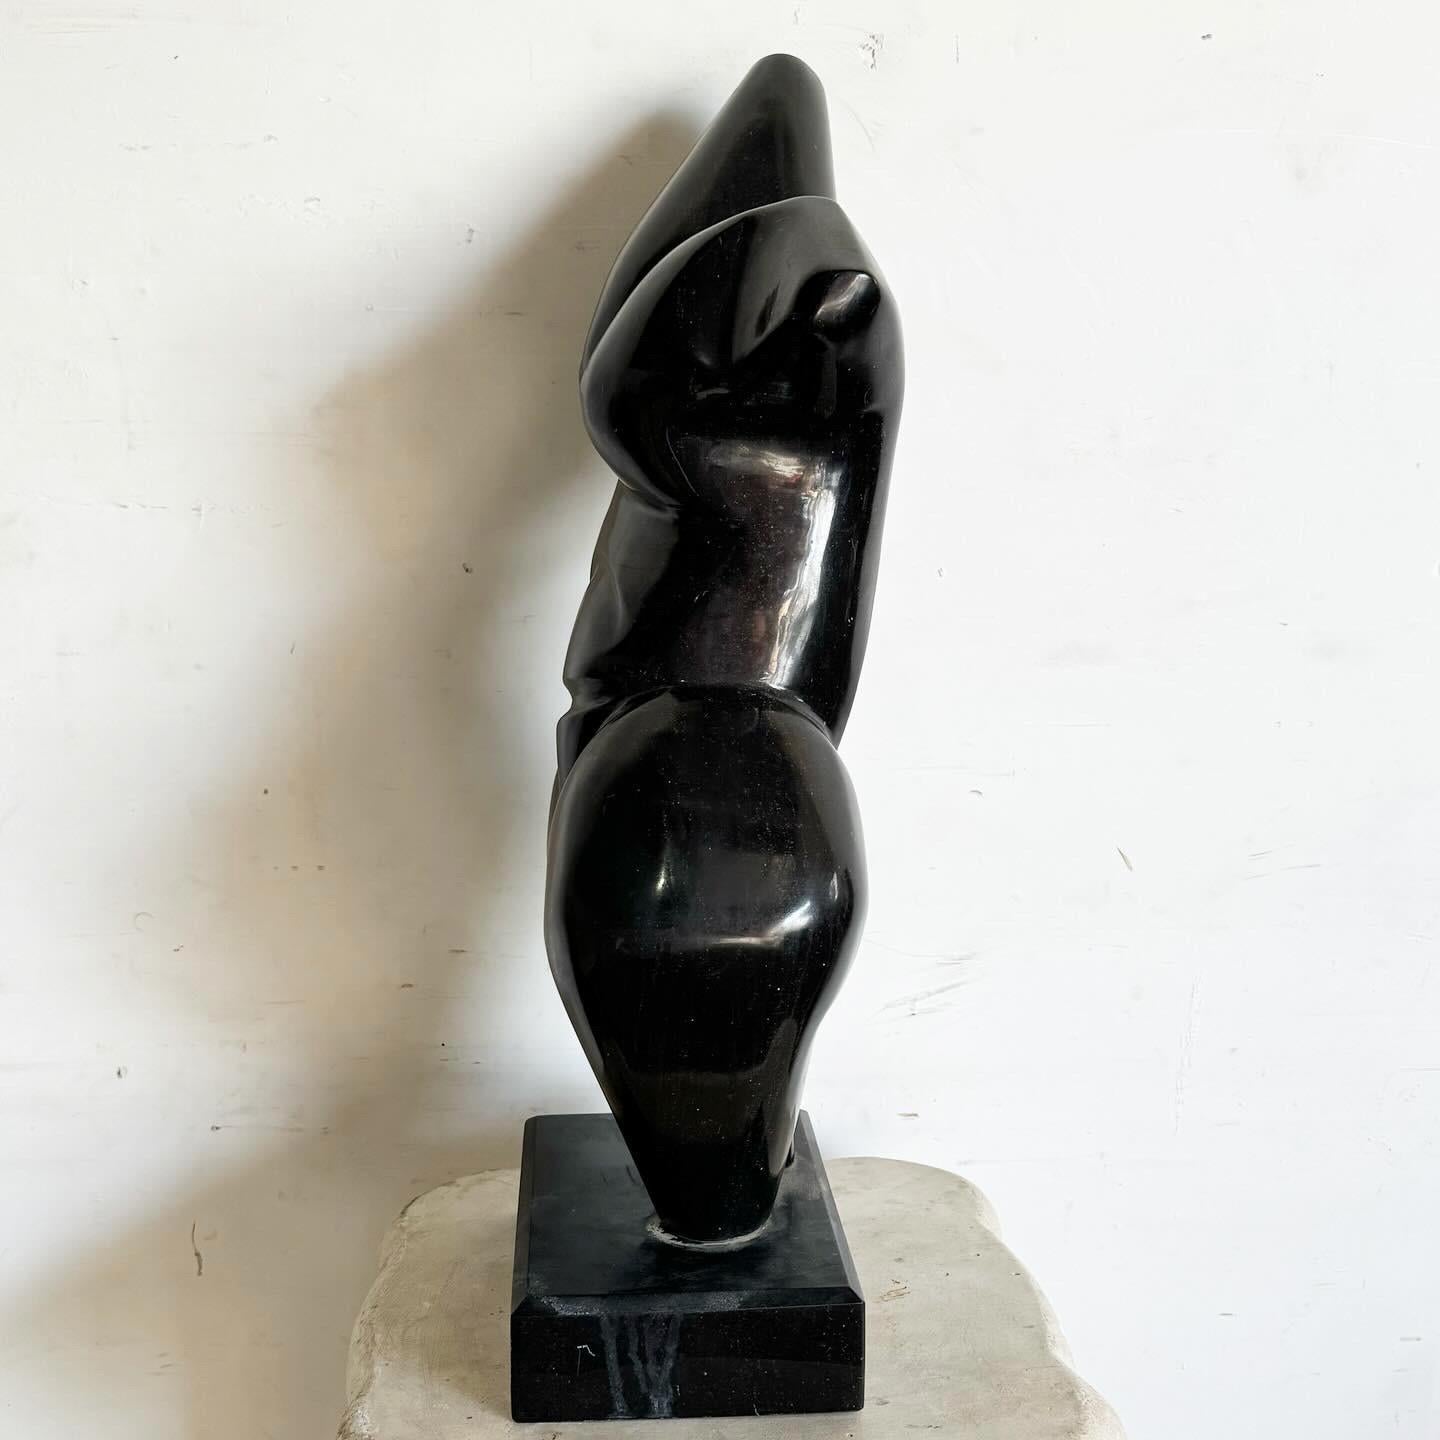 The Black Marble Botero Torso Sculpture is a sophisticated addition to any art collection. Inspired by Fernando Botero's distinctive style, it features a voluptuous and stylized human torso, expertly carved from sleek black marble. Mounted on a